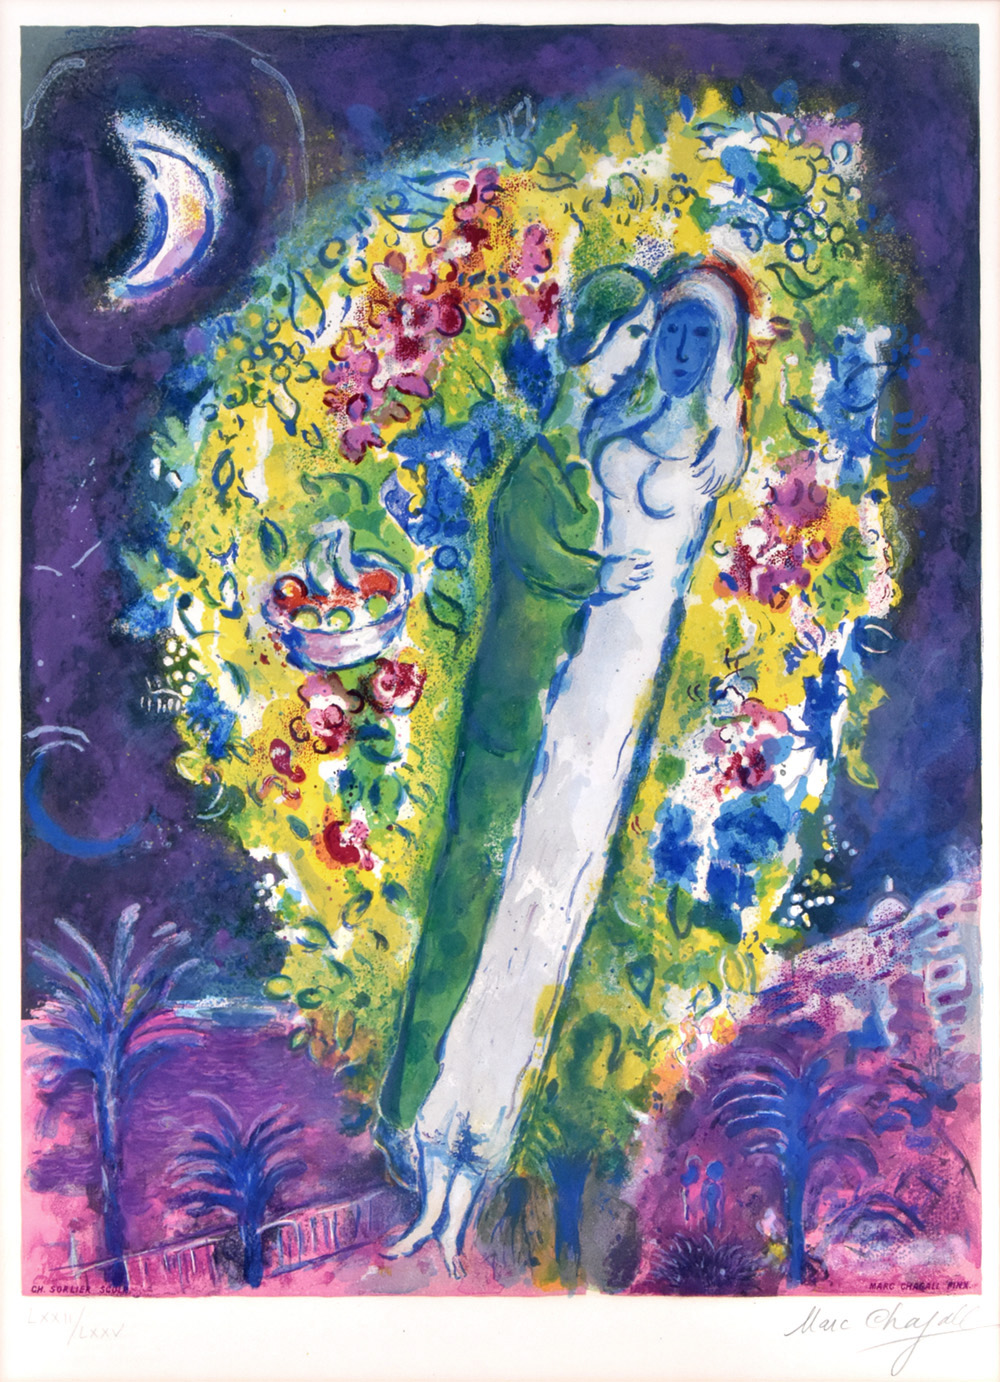 Marc Chagall, Couple dans Mimosa (Couple in Mimosa), from Nice and the Côte d'Azur, 1967